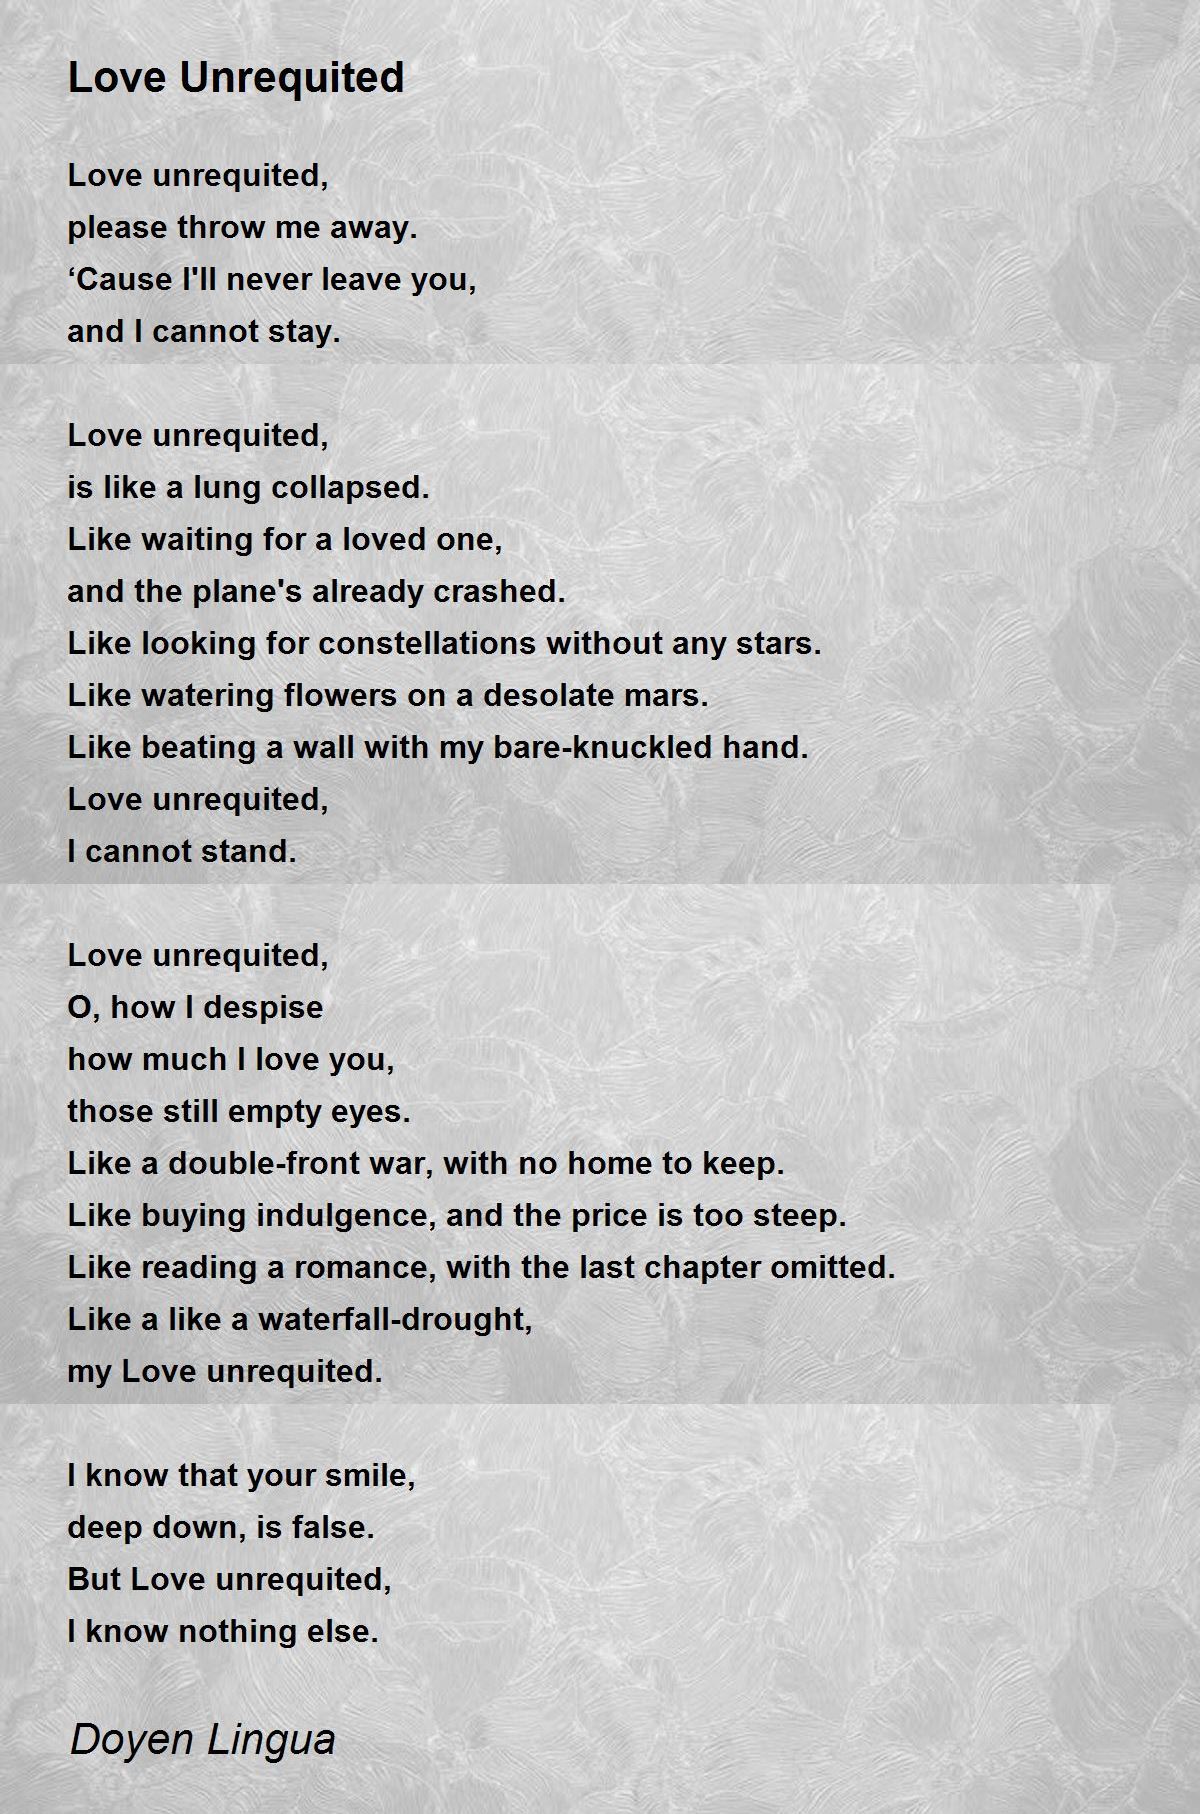 unrequited love quotes shakespeare